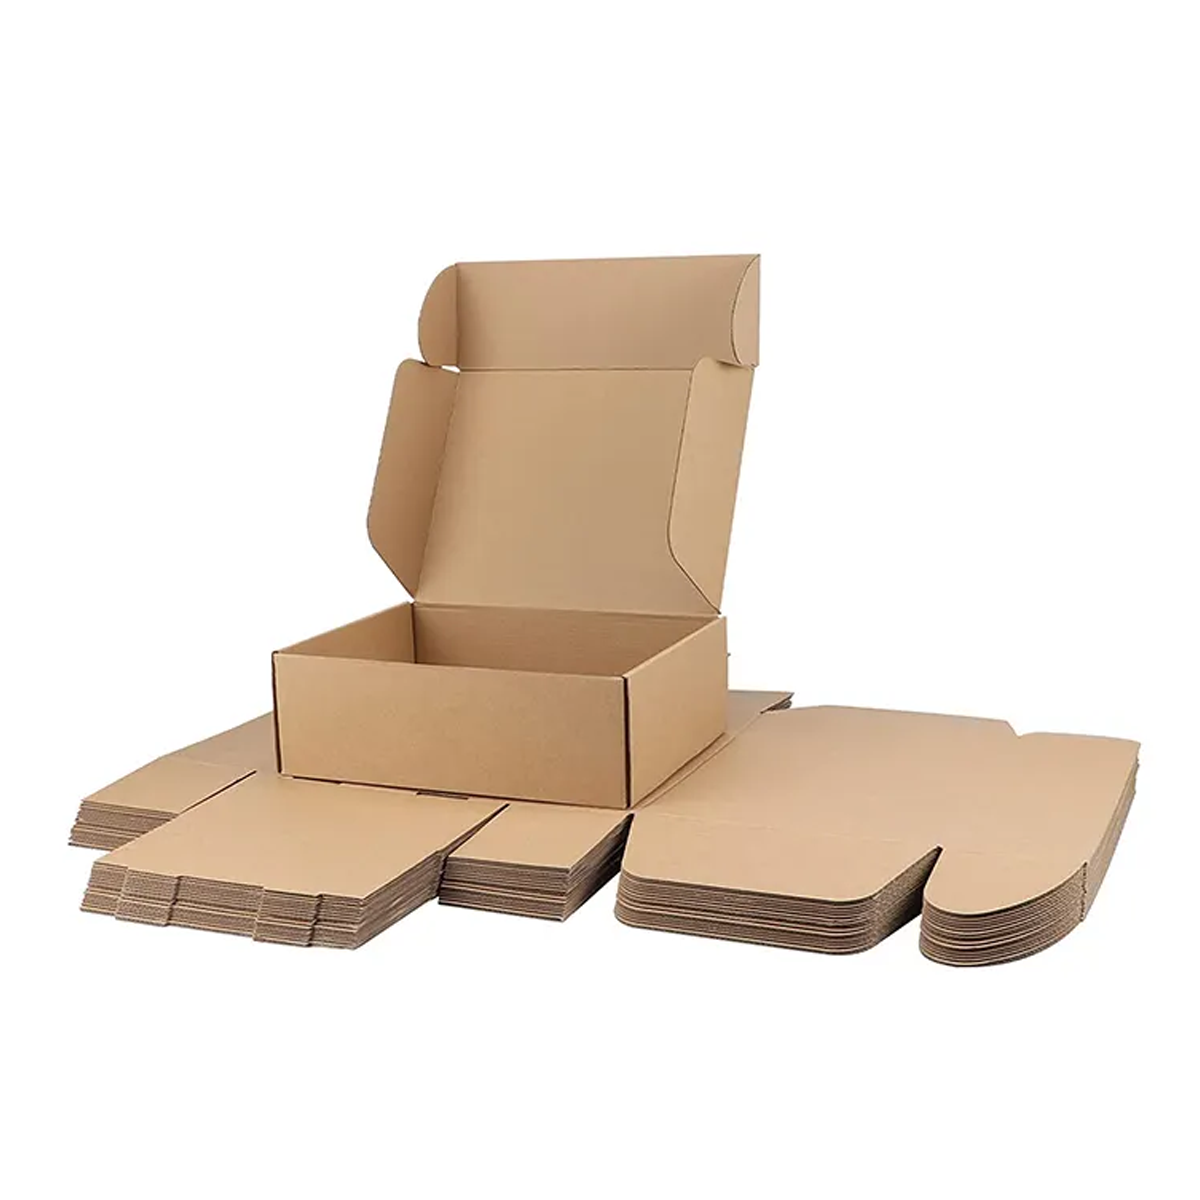 Willow Packaging Shipping Corrugated Box Eco Friendly Brown Mailing Box 20x15x10 Cm – (100Pc Pack)